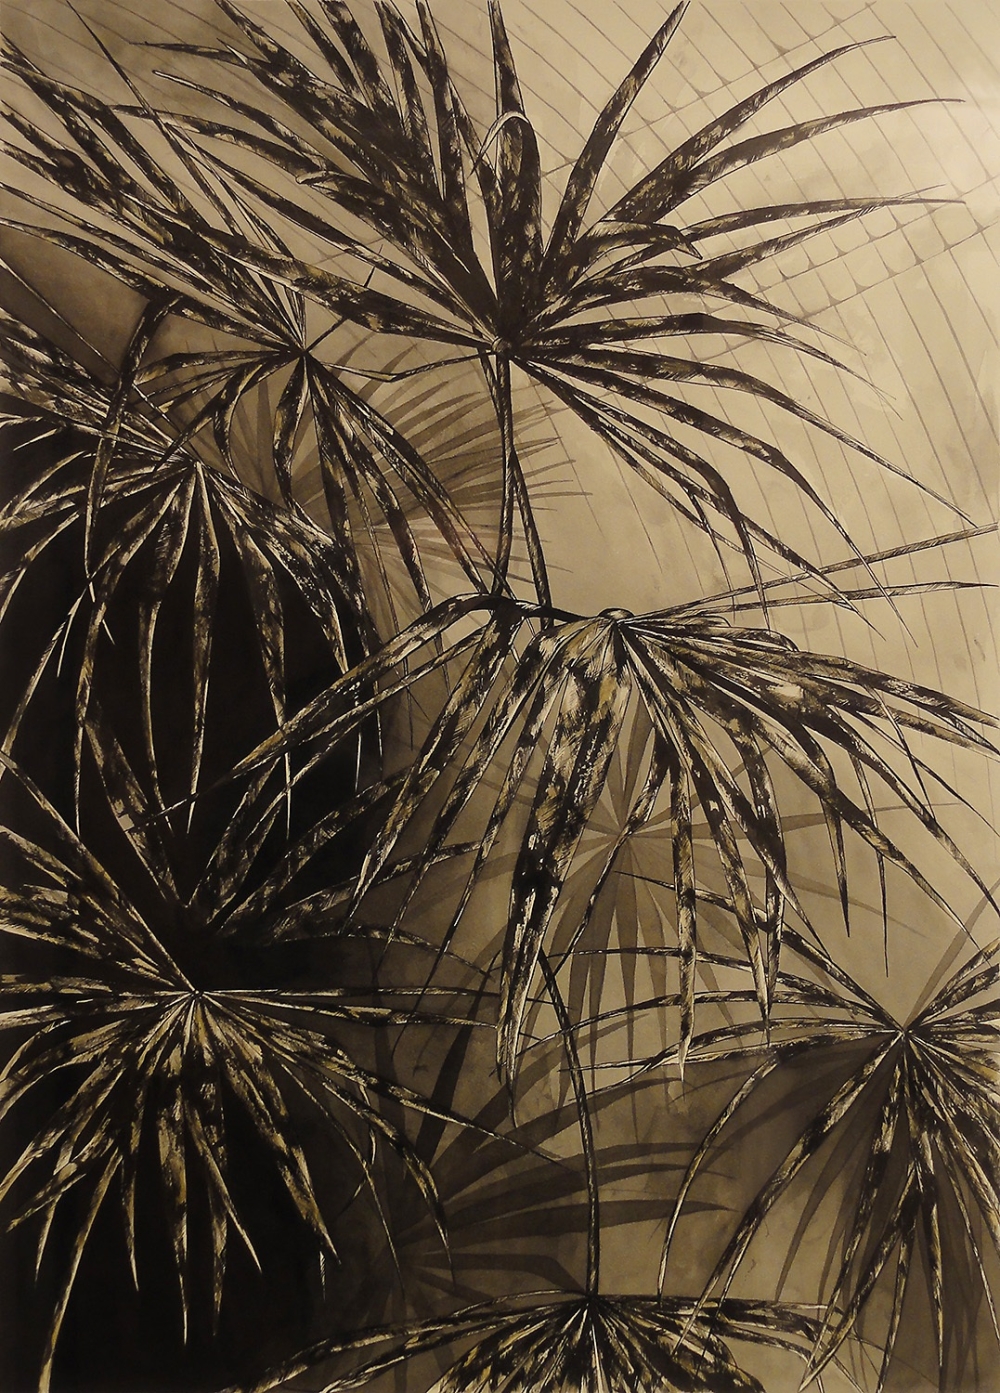 Palm House II 54 x 72cm sumi ink and acrylic on paper 2012